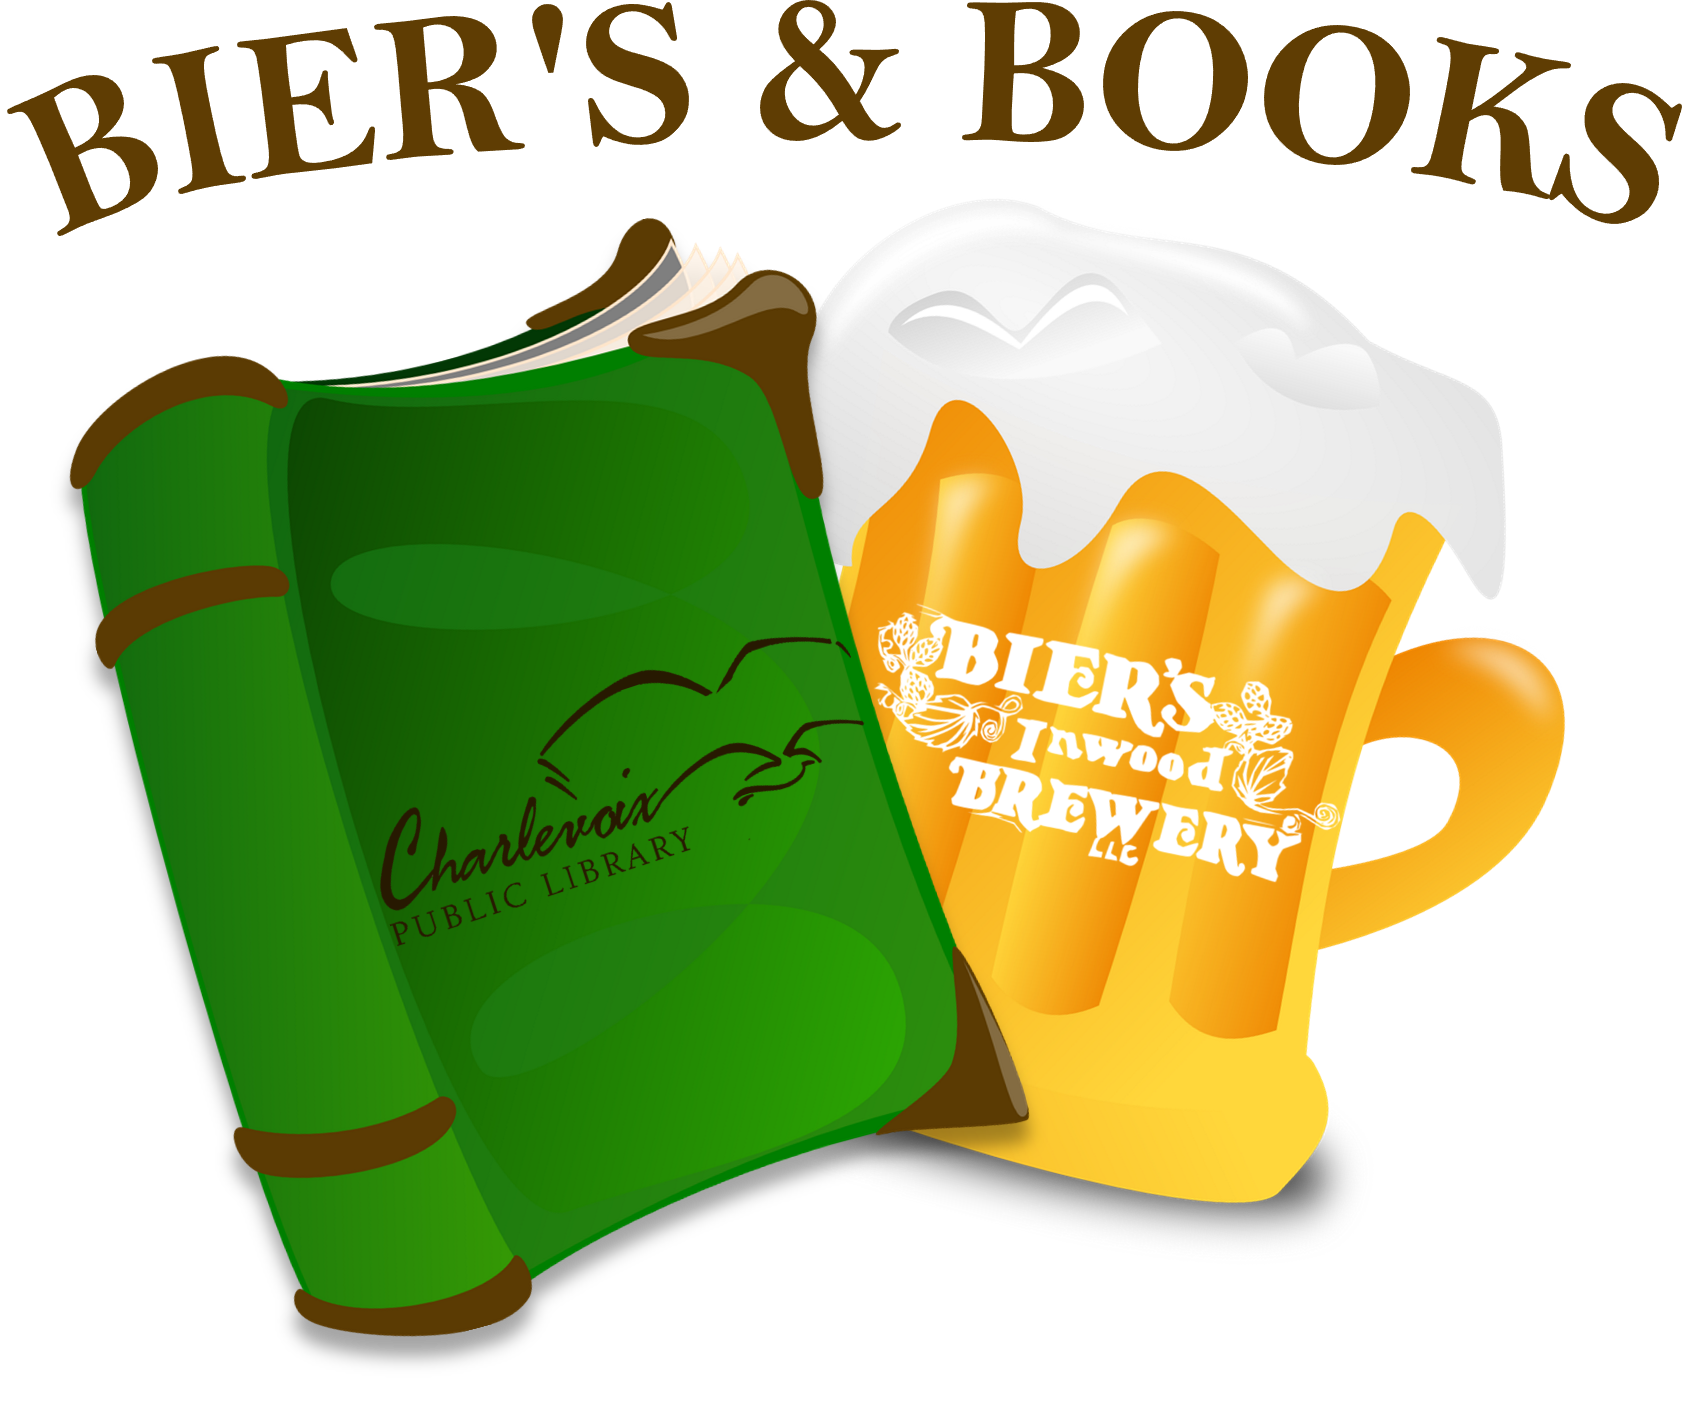 A book and a beer logo